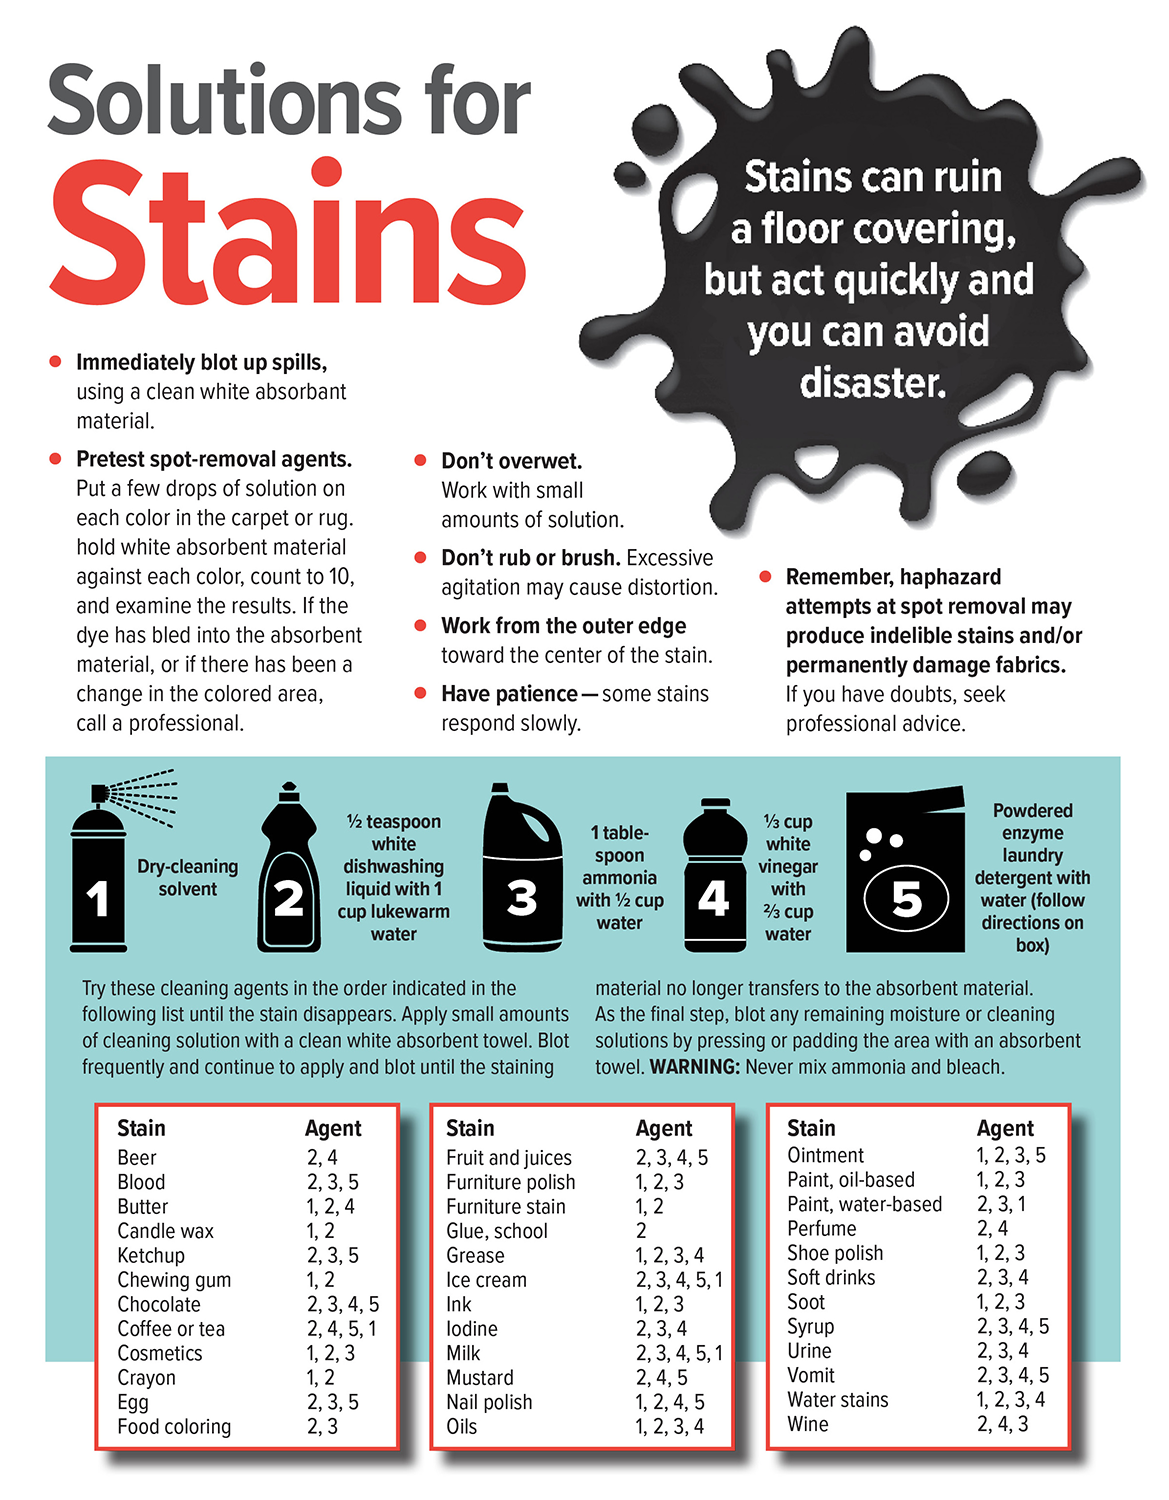 Solutions for Stains